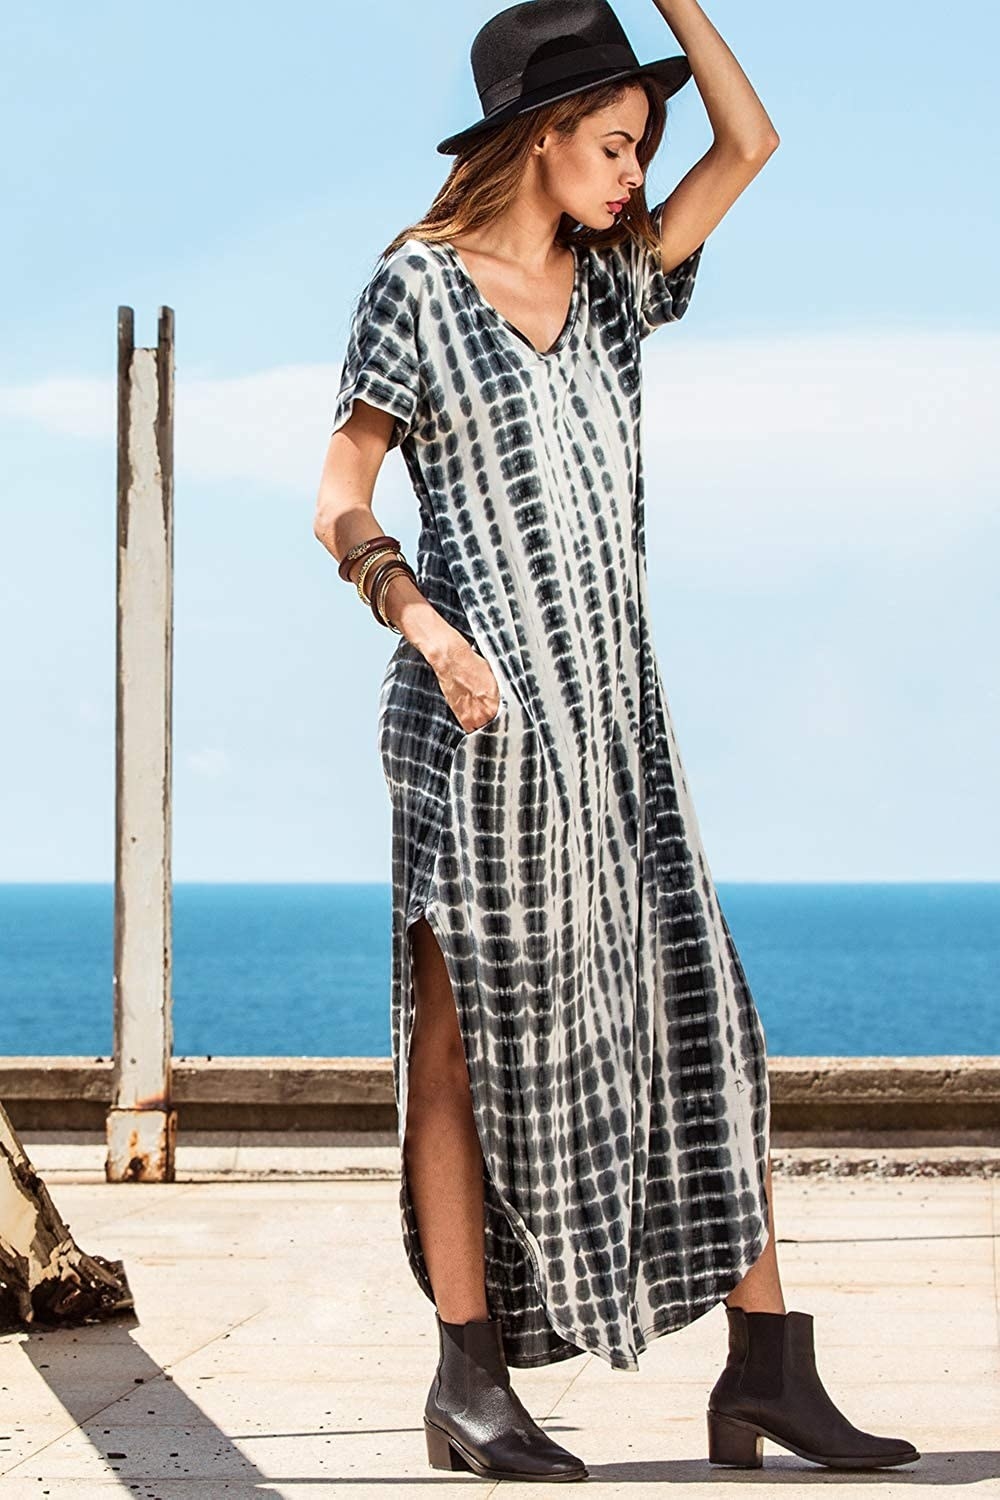 An ankle length dress made of jersey knit material with a mid-thigh hitting slit up both sides. It has short sleeves, pockets, and a V-neck collar. 